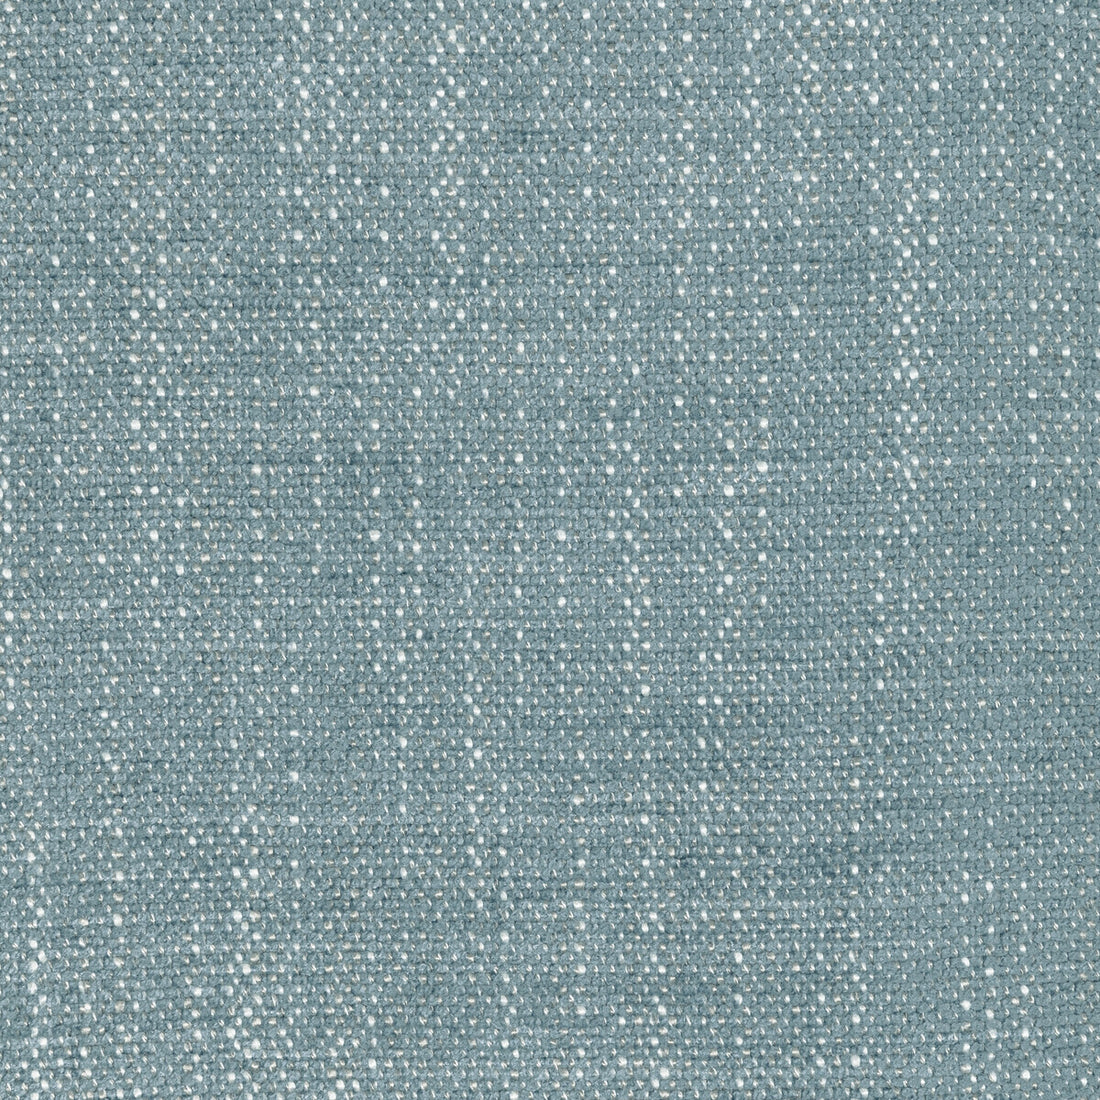 Kravet Design fabric in 36408-15 color - pattern 36408.15.0 - by Kravet Design in the Performance Crypton Home collection